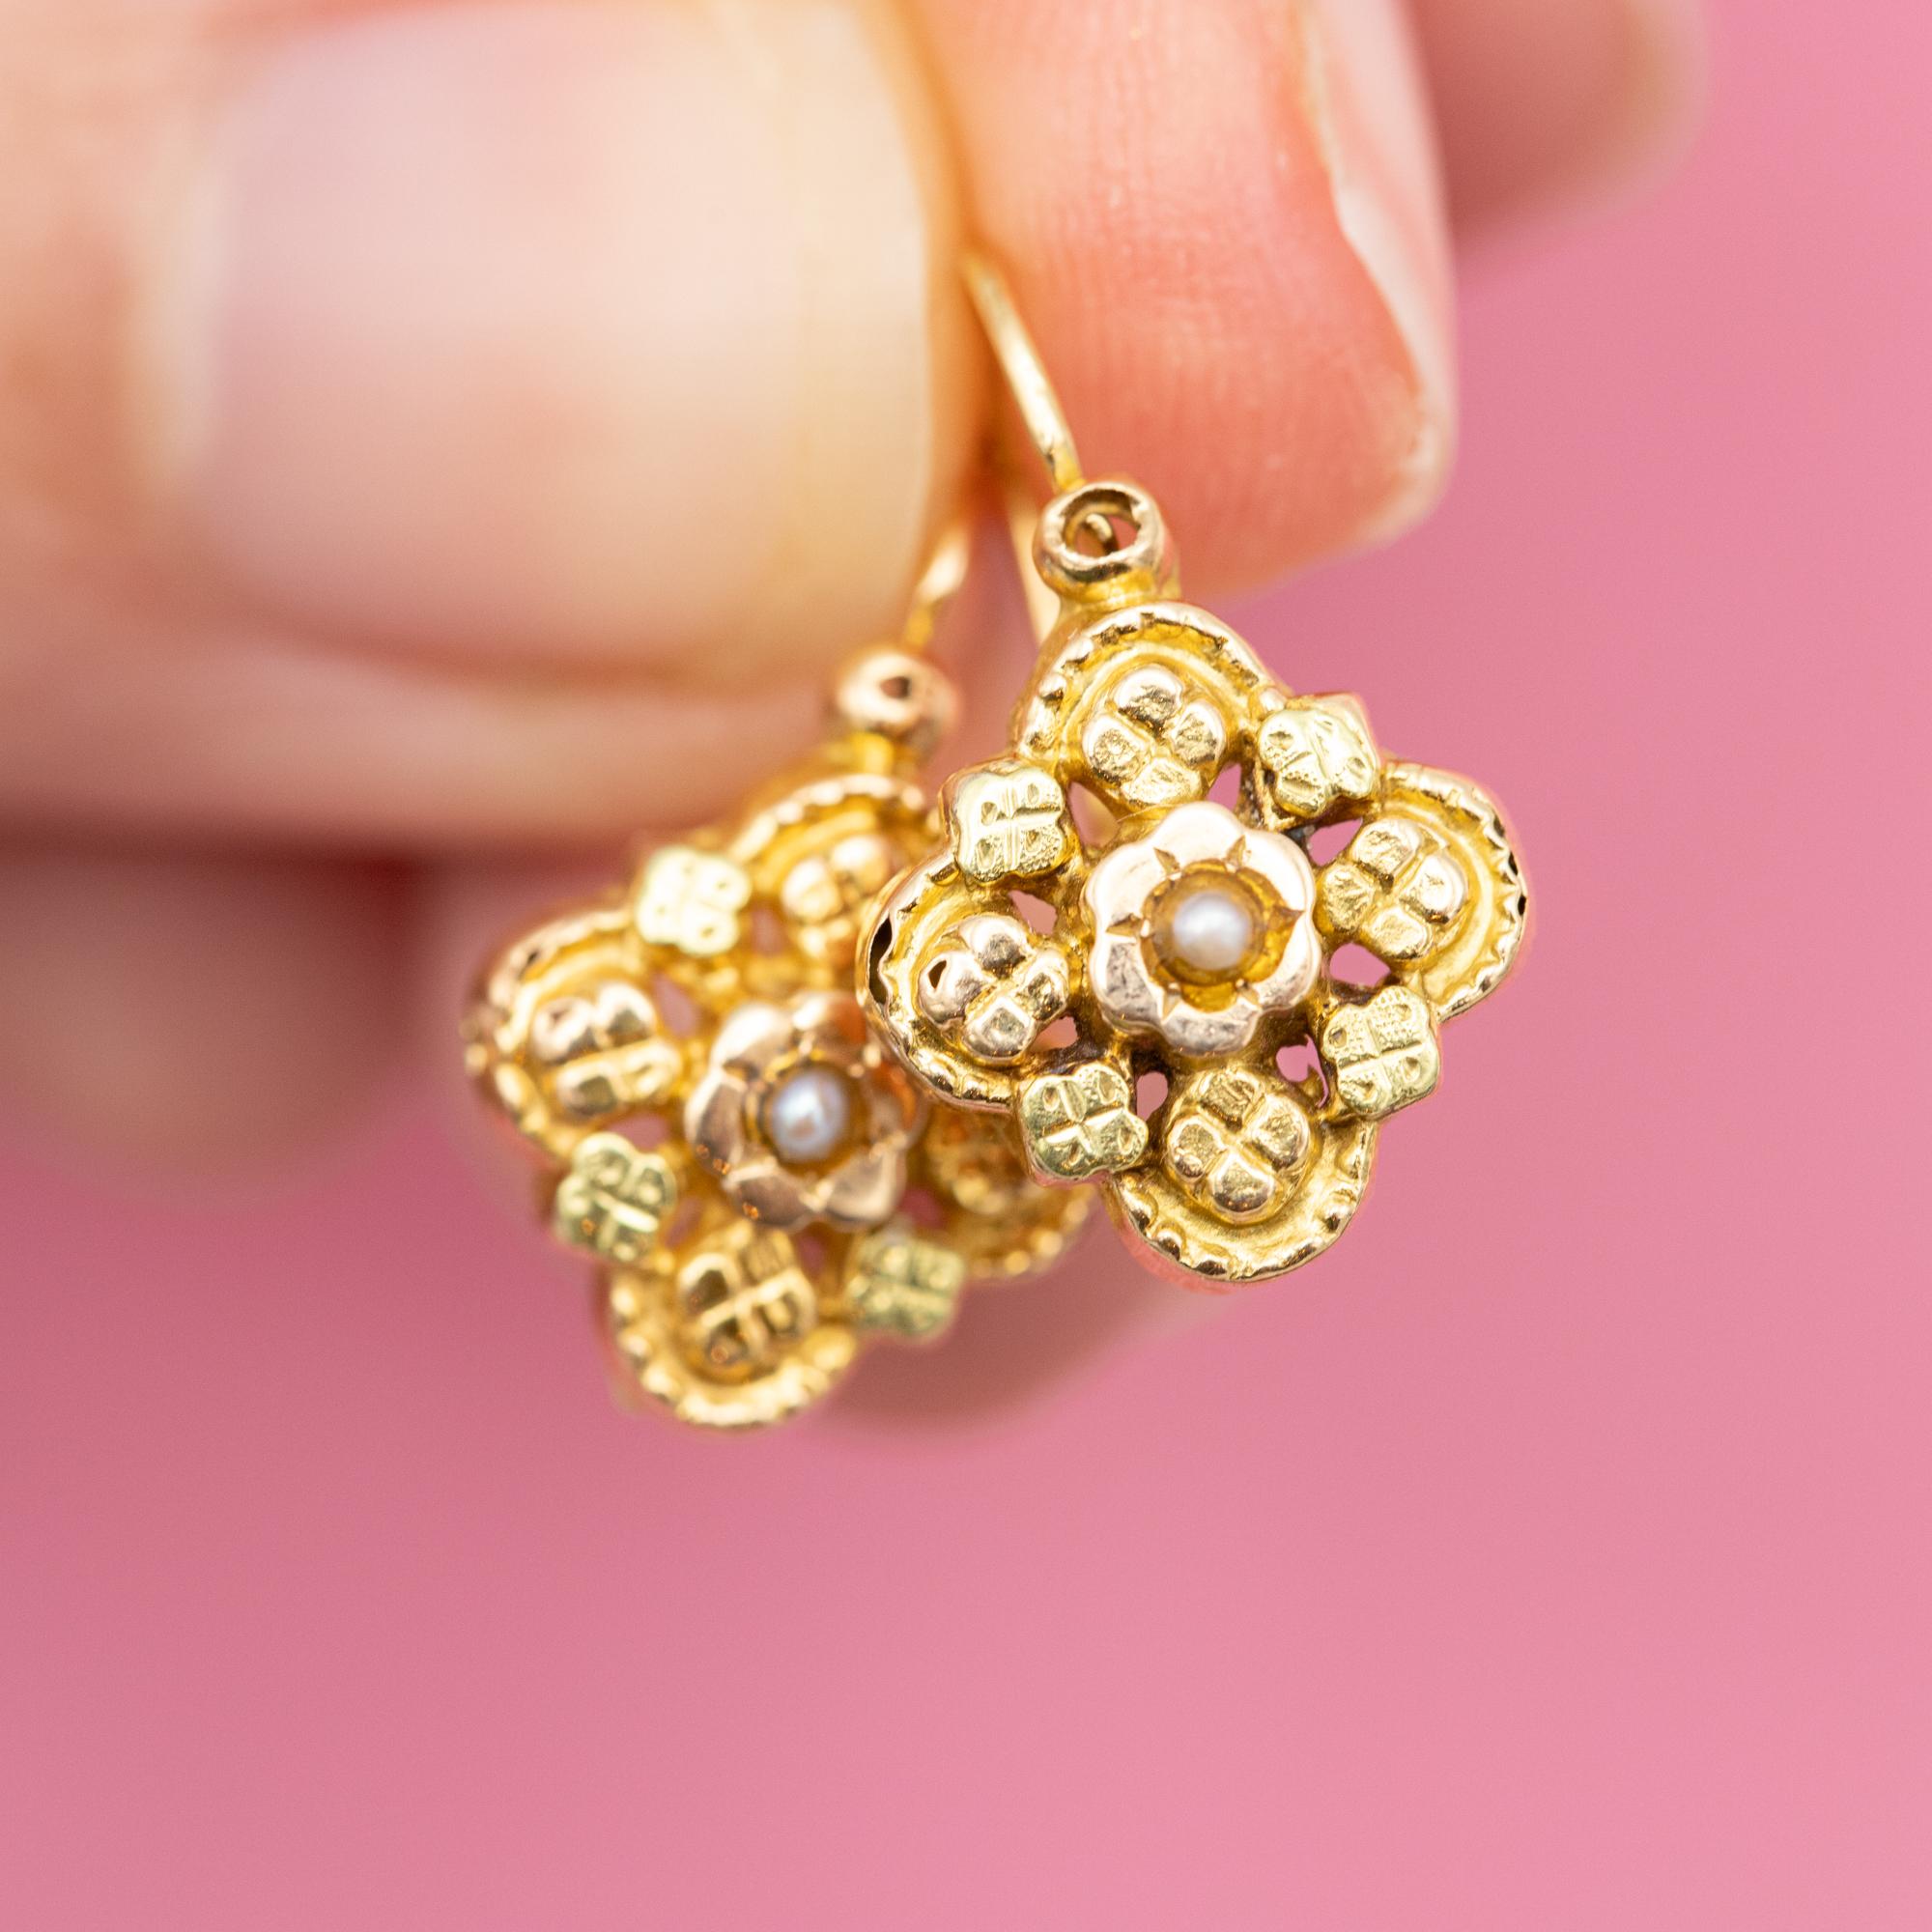 For sale are these cute French Napoleon III earrings. These 18 ct yellow gold dormeuse earrings (also called sleepers) have a front closure and are decorated with flower shaped ornaments, little seed pearls and finished with a lot of detail. The